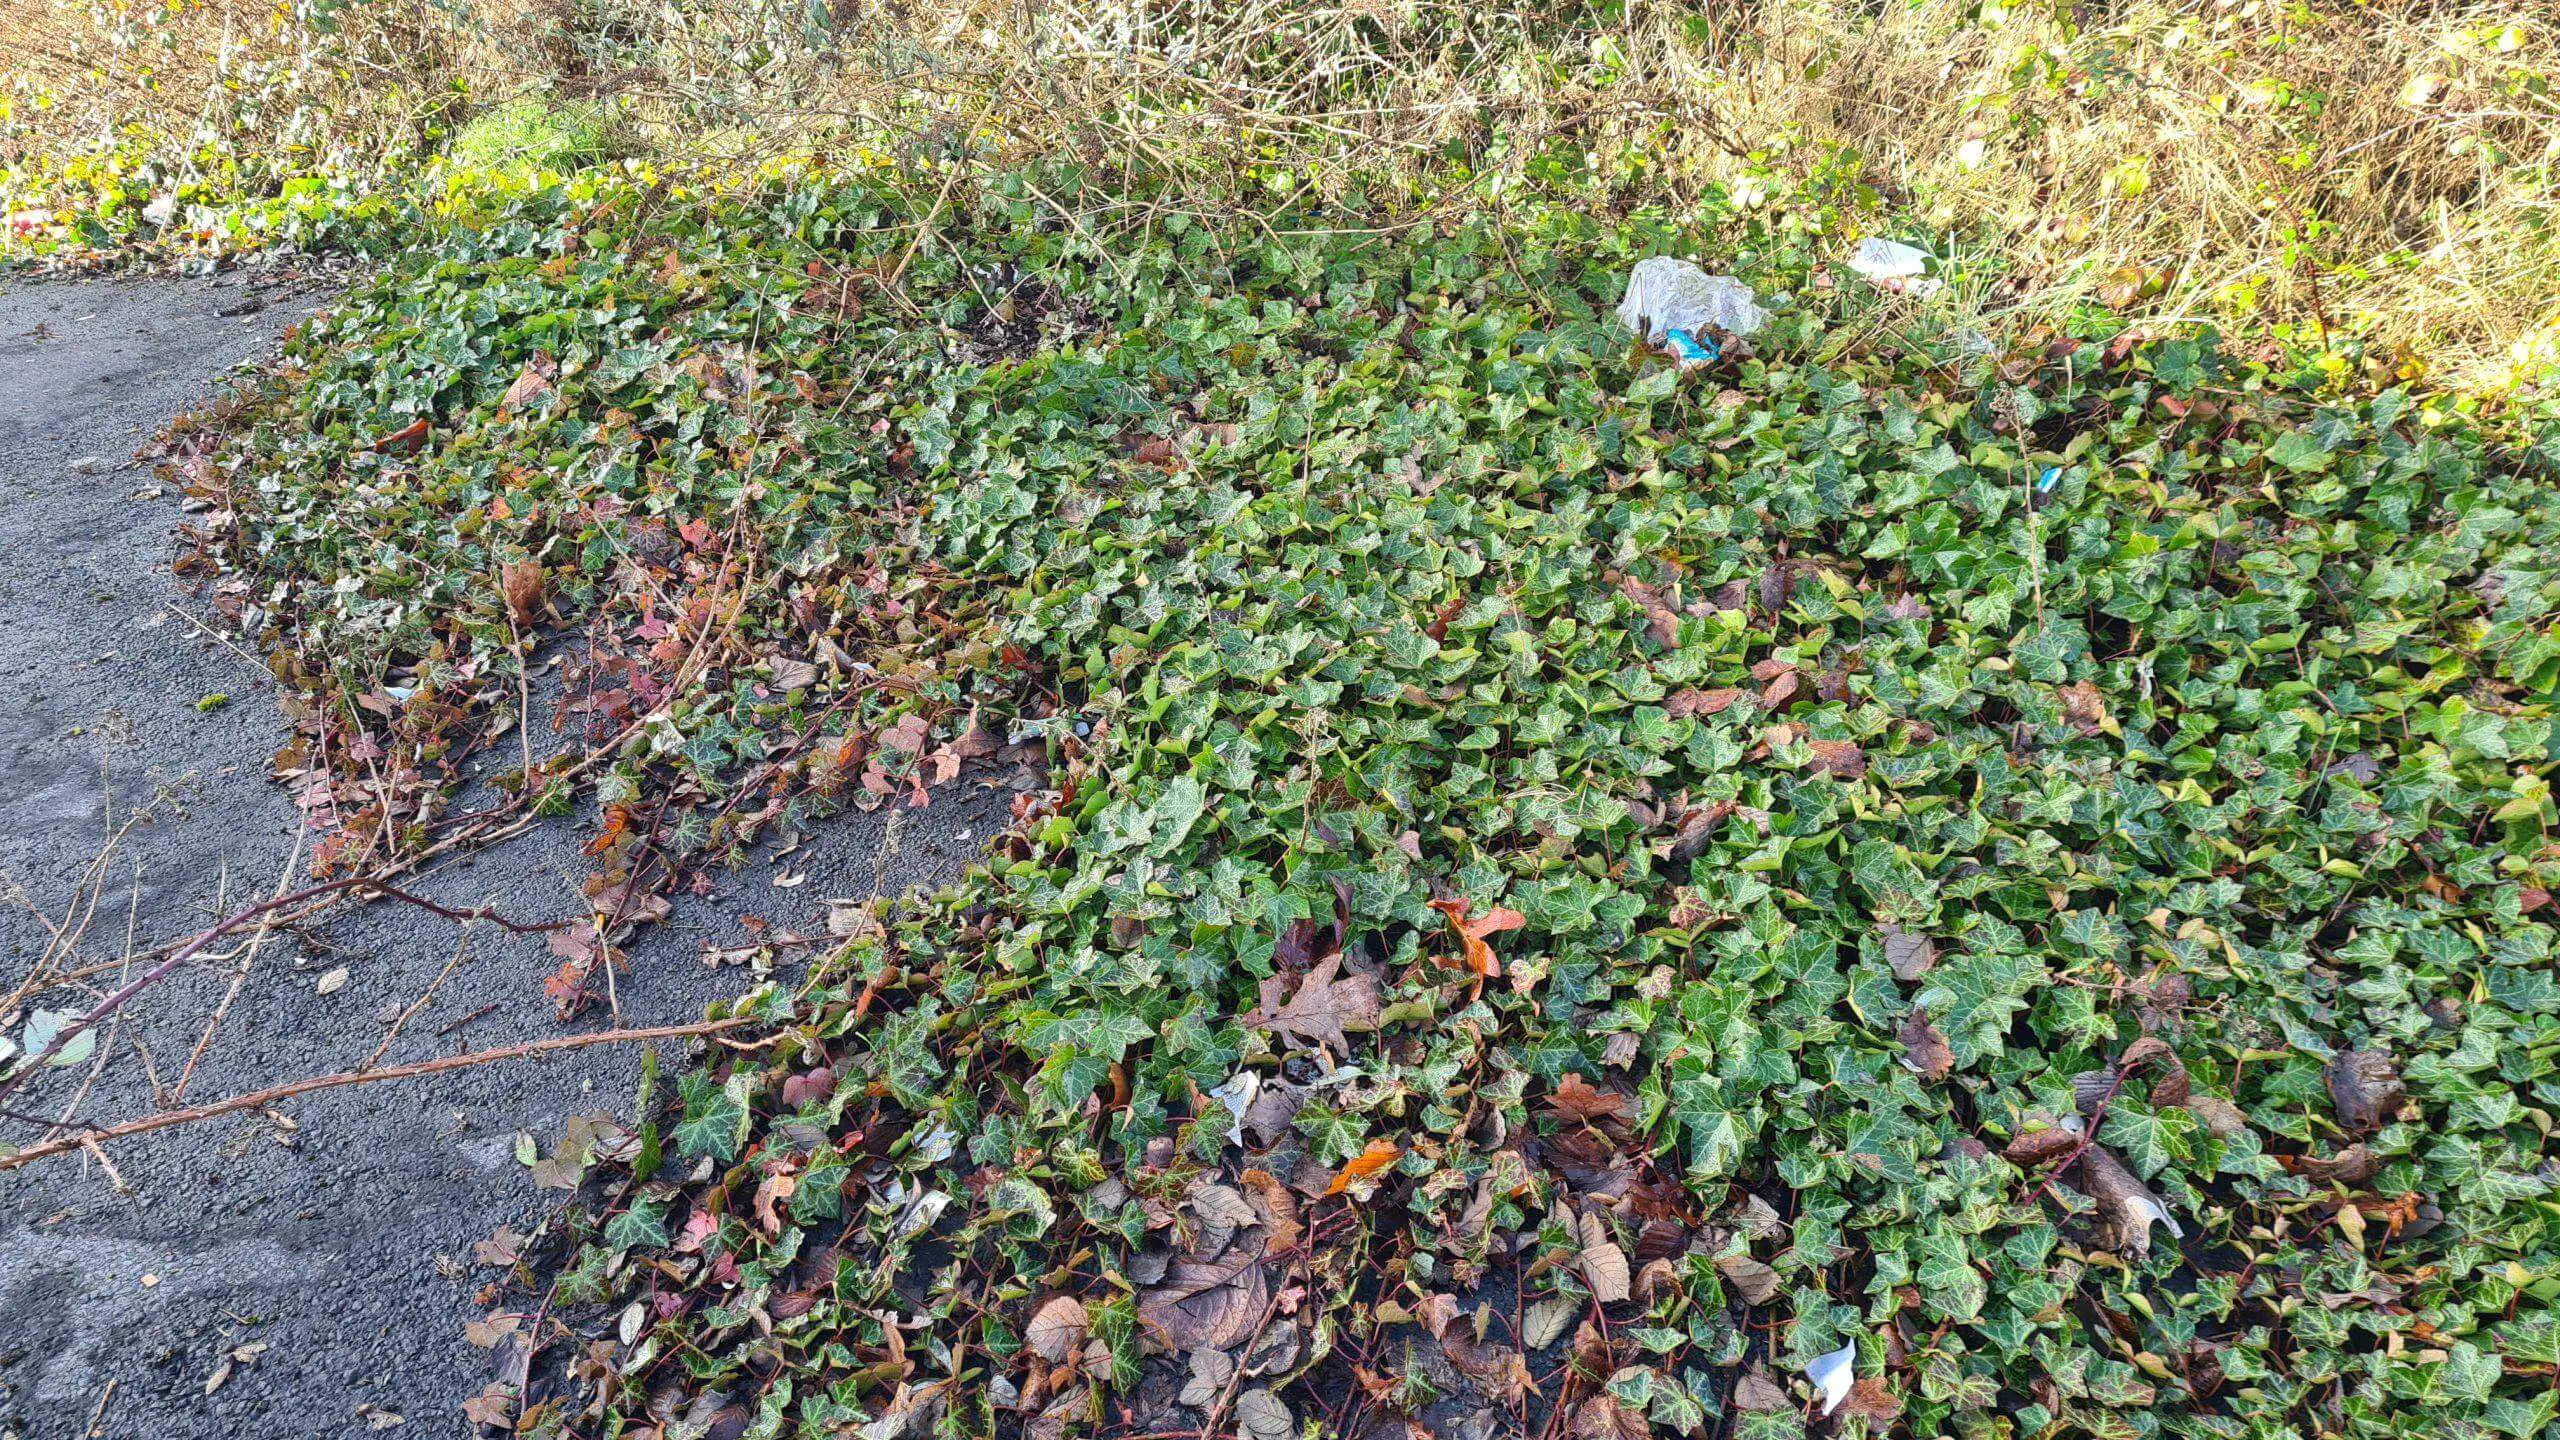 Ground Ivy covering a driveway and making it unsafe